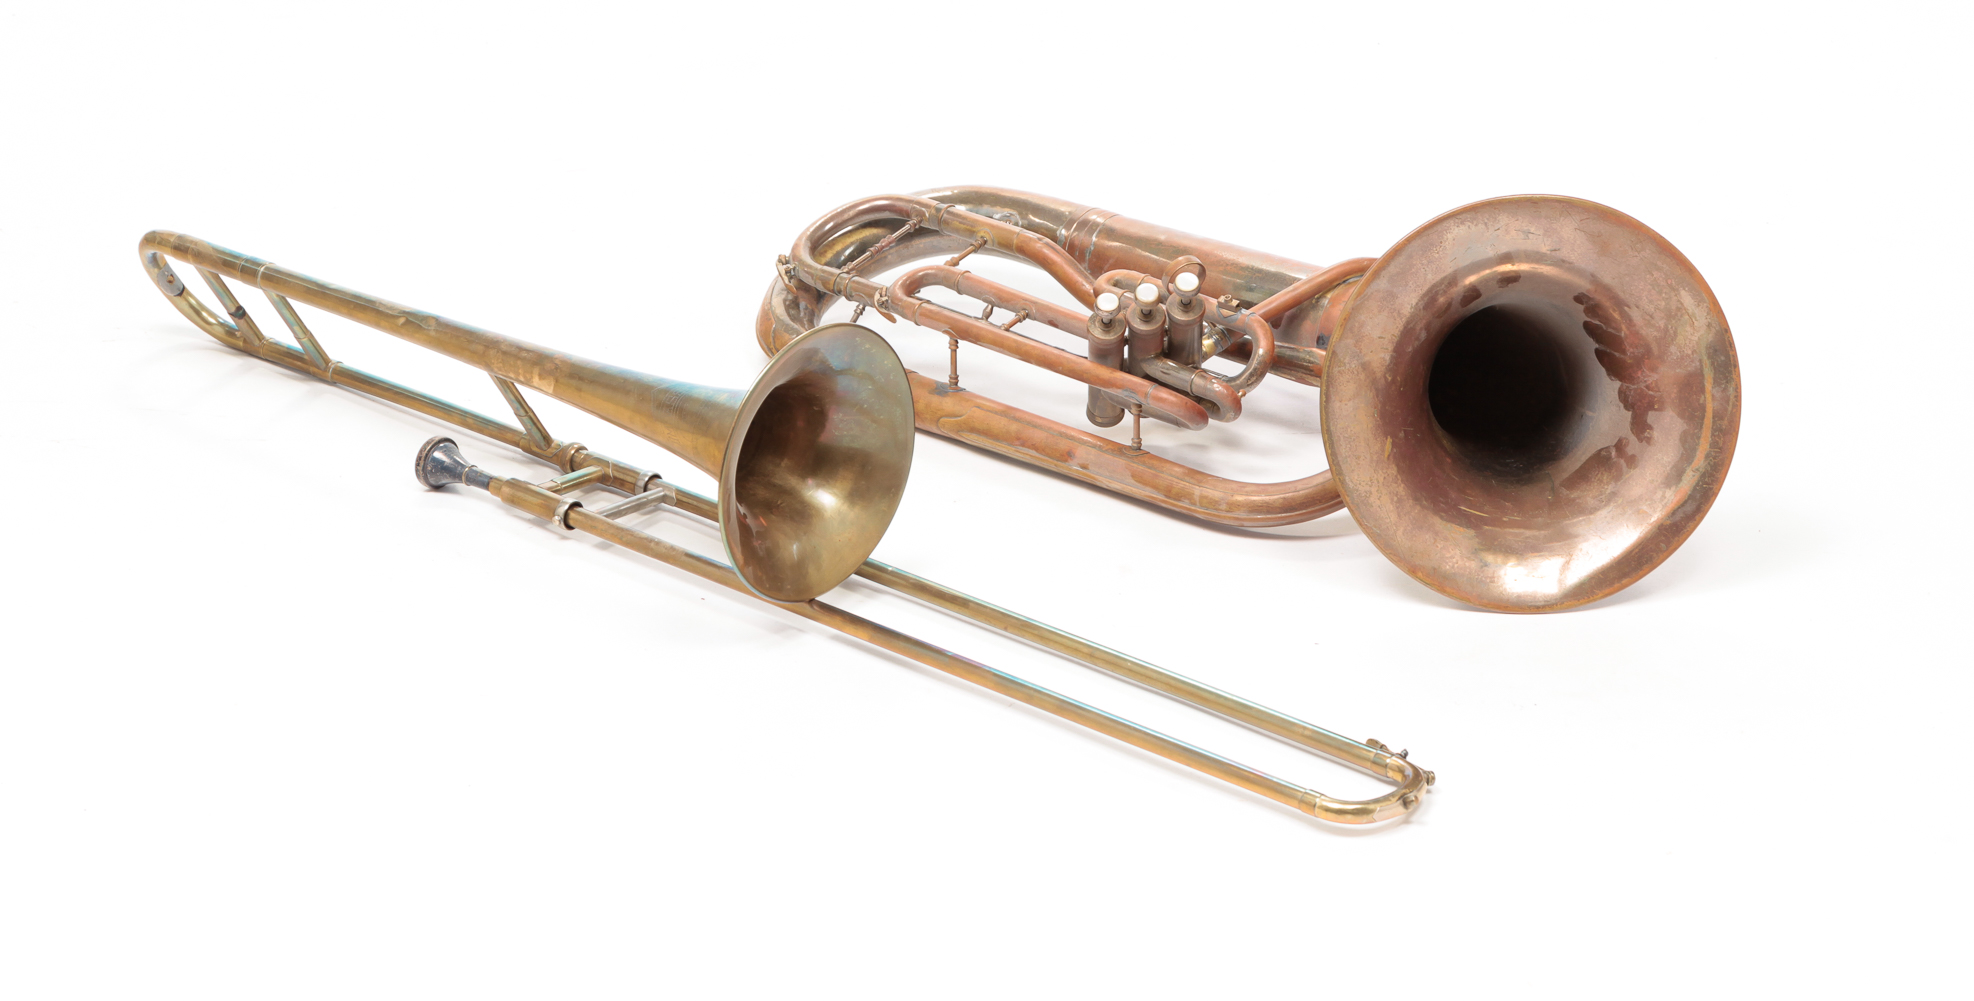 TWO AMERICAN BRASS INSTRUMENTS  2e0372